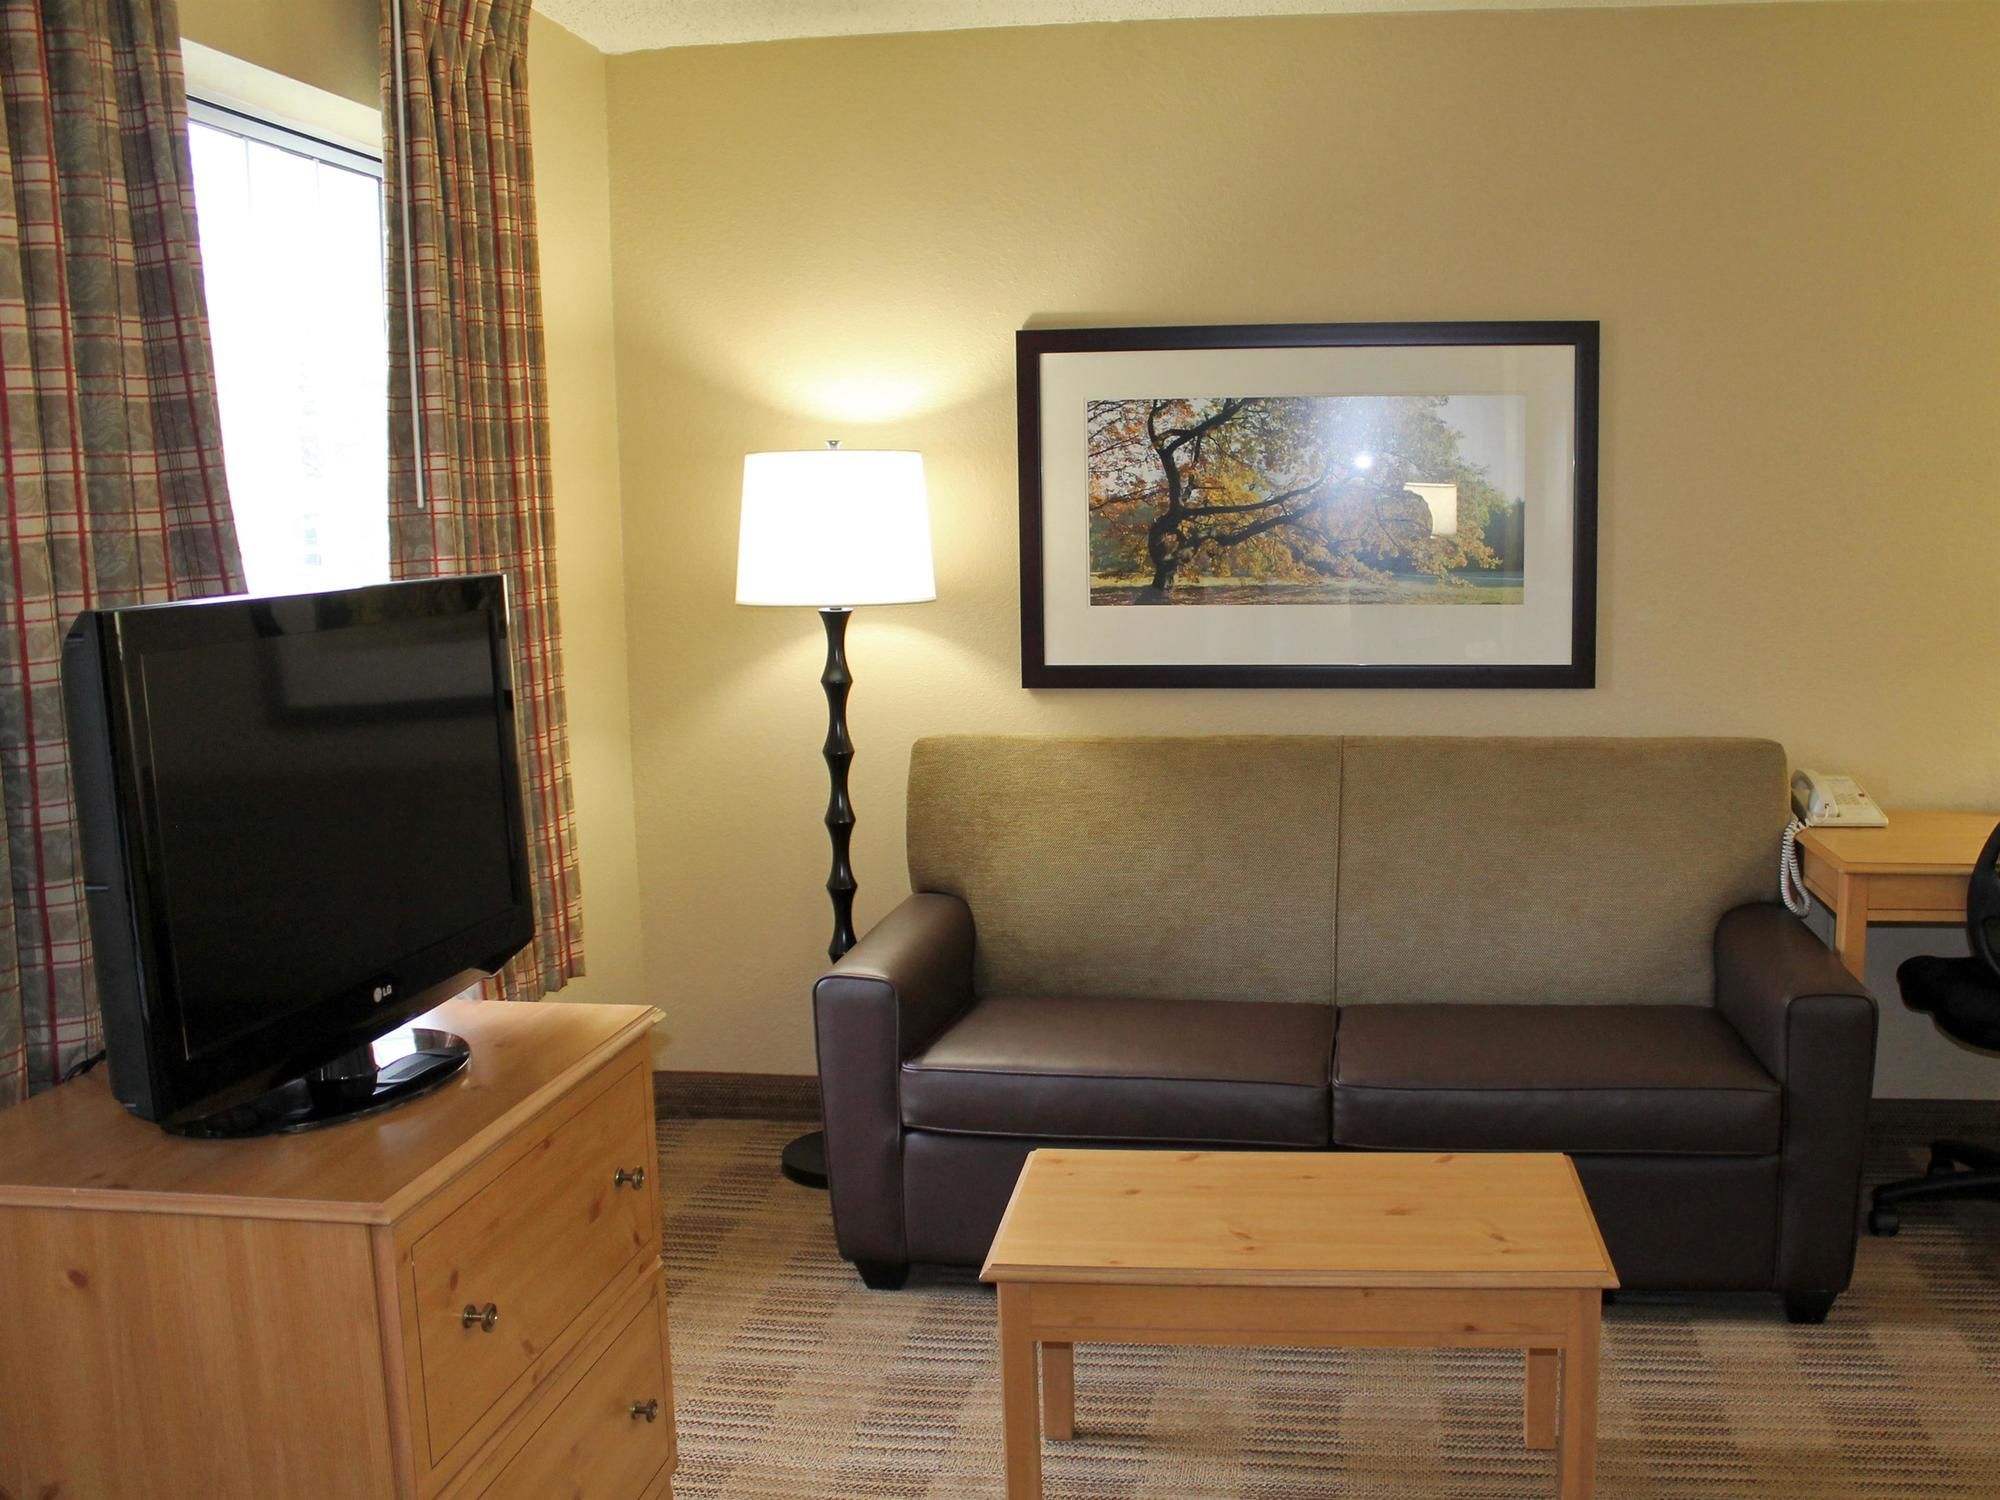 Extended Stay America Orange County Cypress